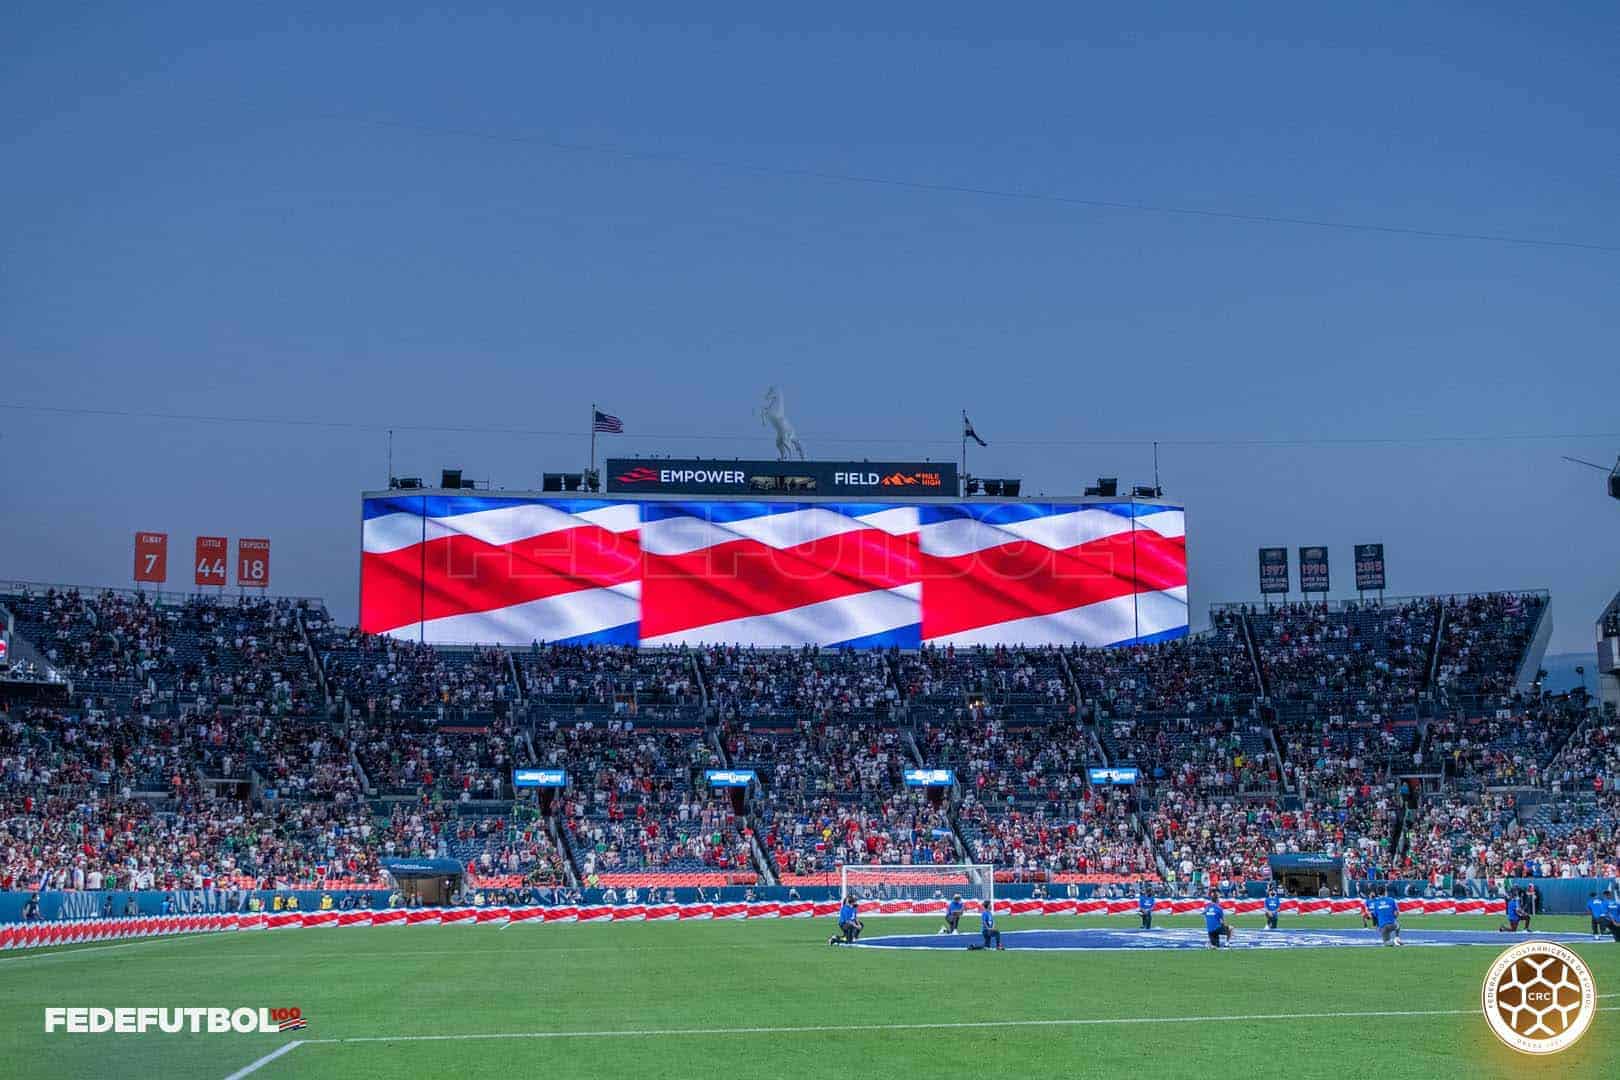 Costa Rica vs. Mexico at the Nations League semifinal in Denver on June 3, 2021.